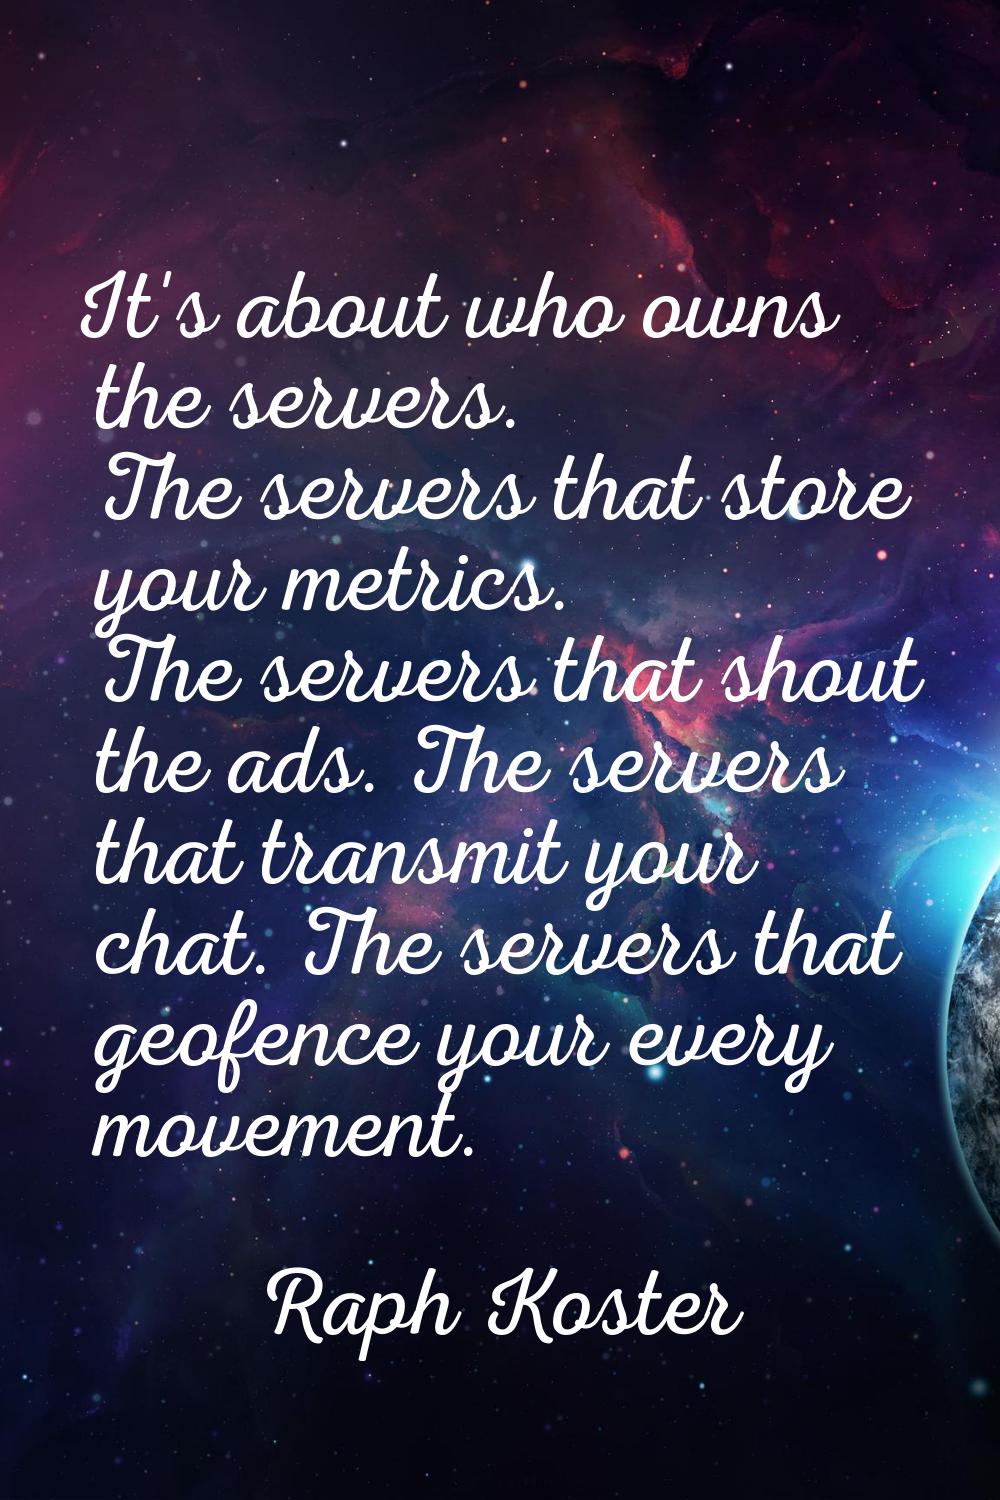 It's about who owns the servers. The servers that store your metrics. The servers that shout the ad